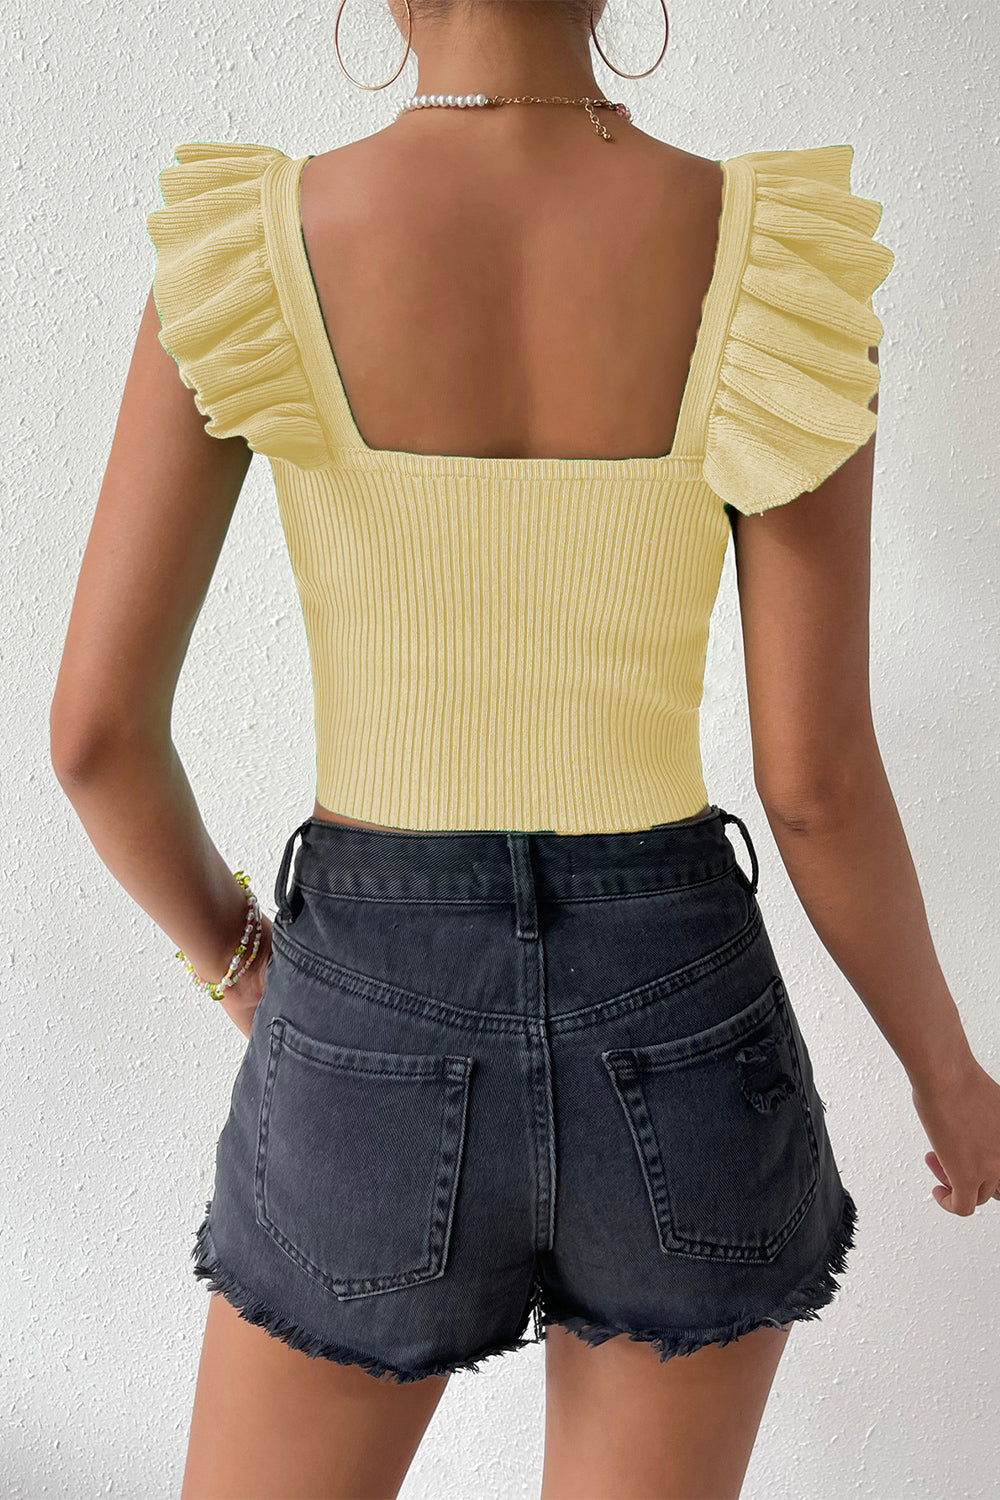 Square Neck Tie Front Knit Top - Tops & Tees - Shirts & Tops - 6 - 2024